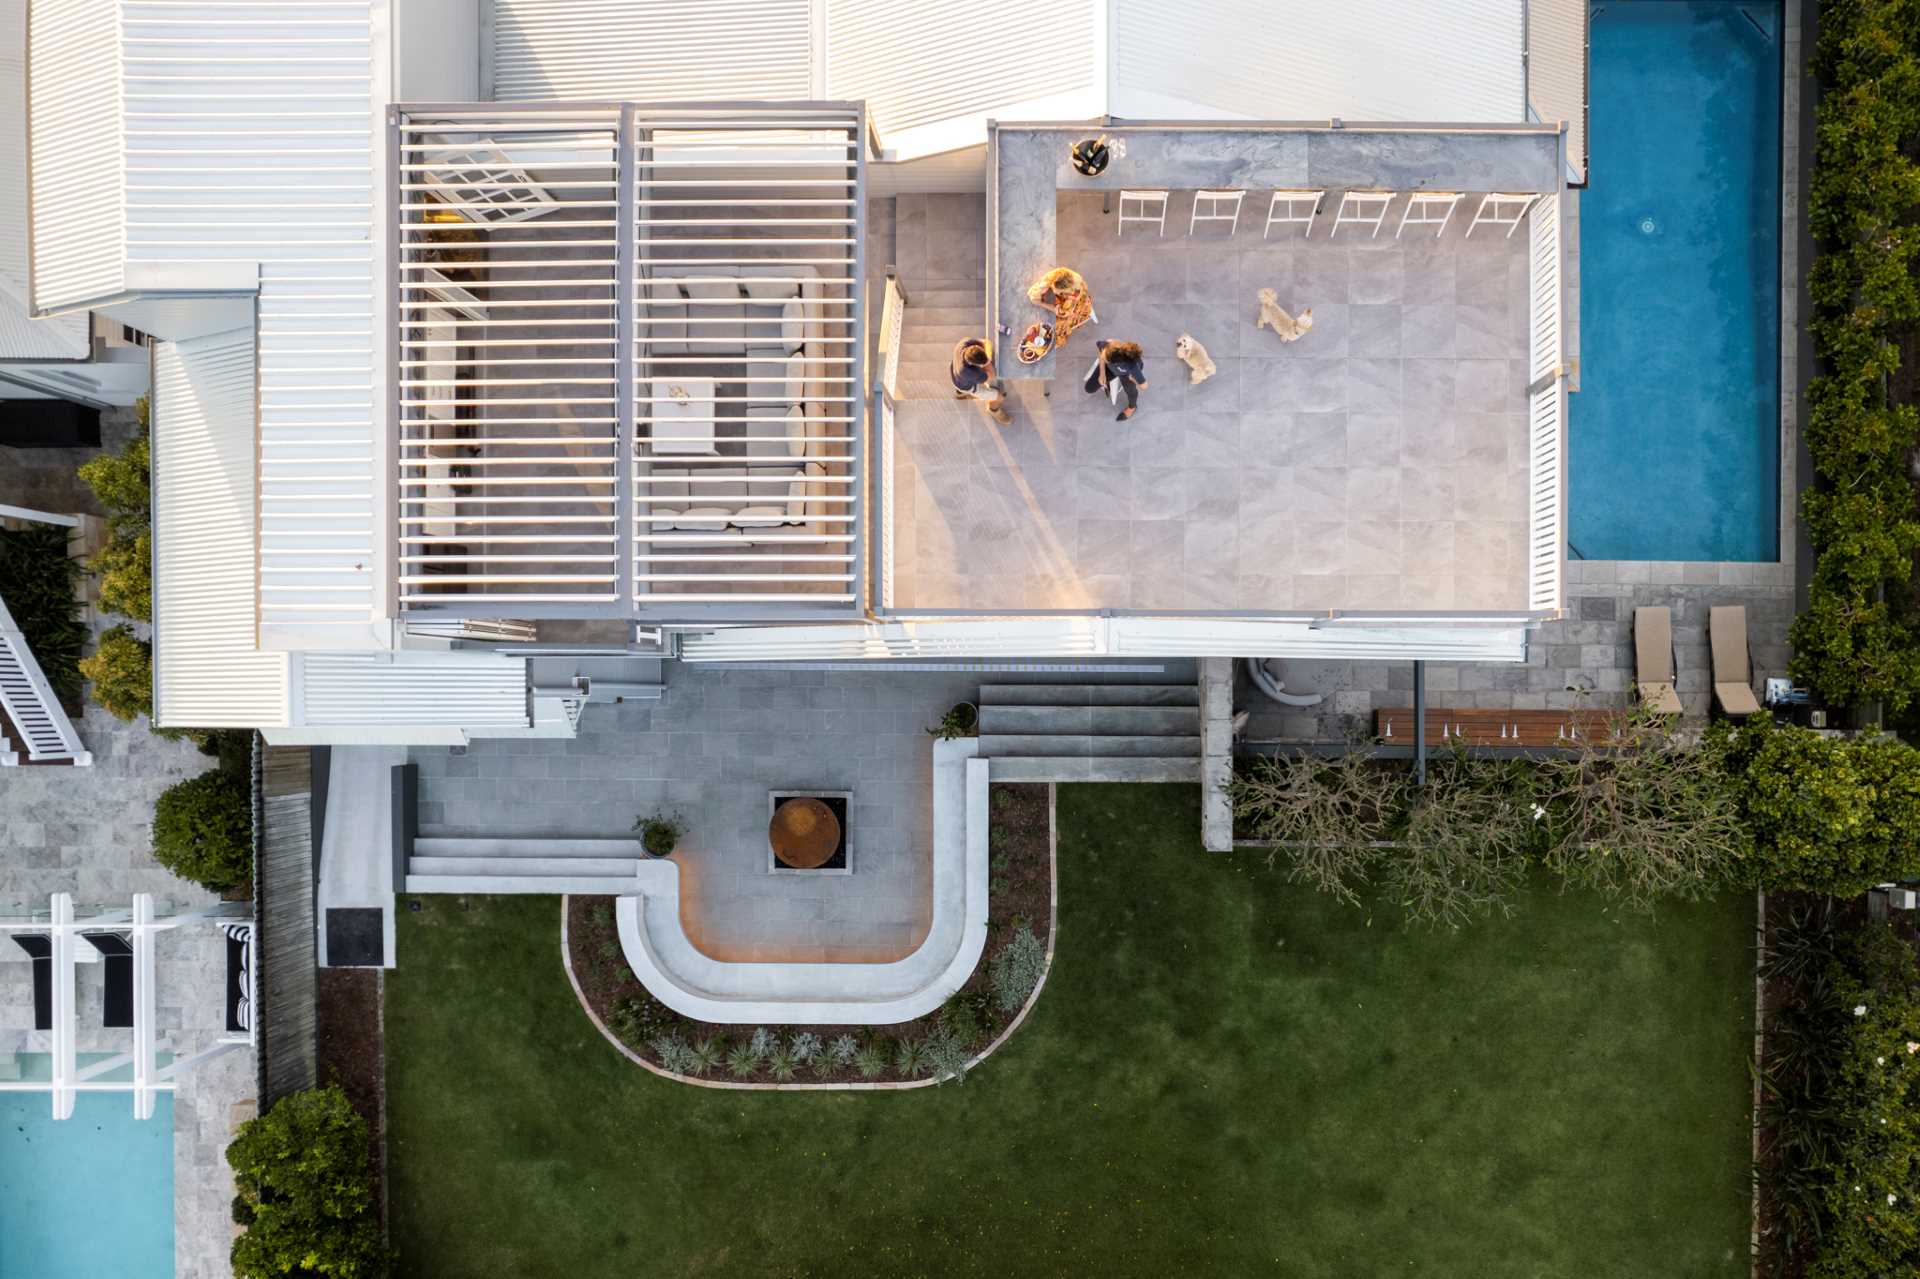 Aerial view of a renovated footop deck | Featured image for the Good Design in Architecture blog from Clements Clarke Architects.